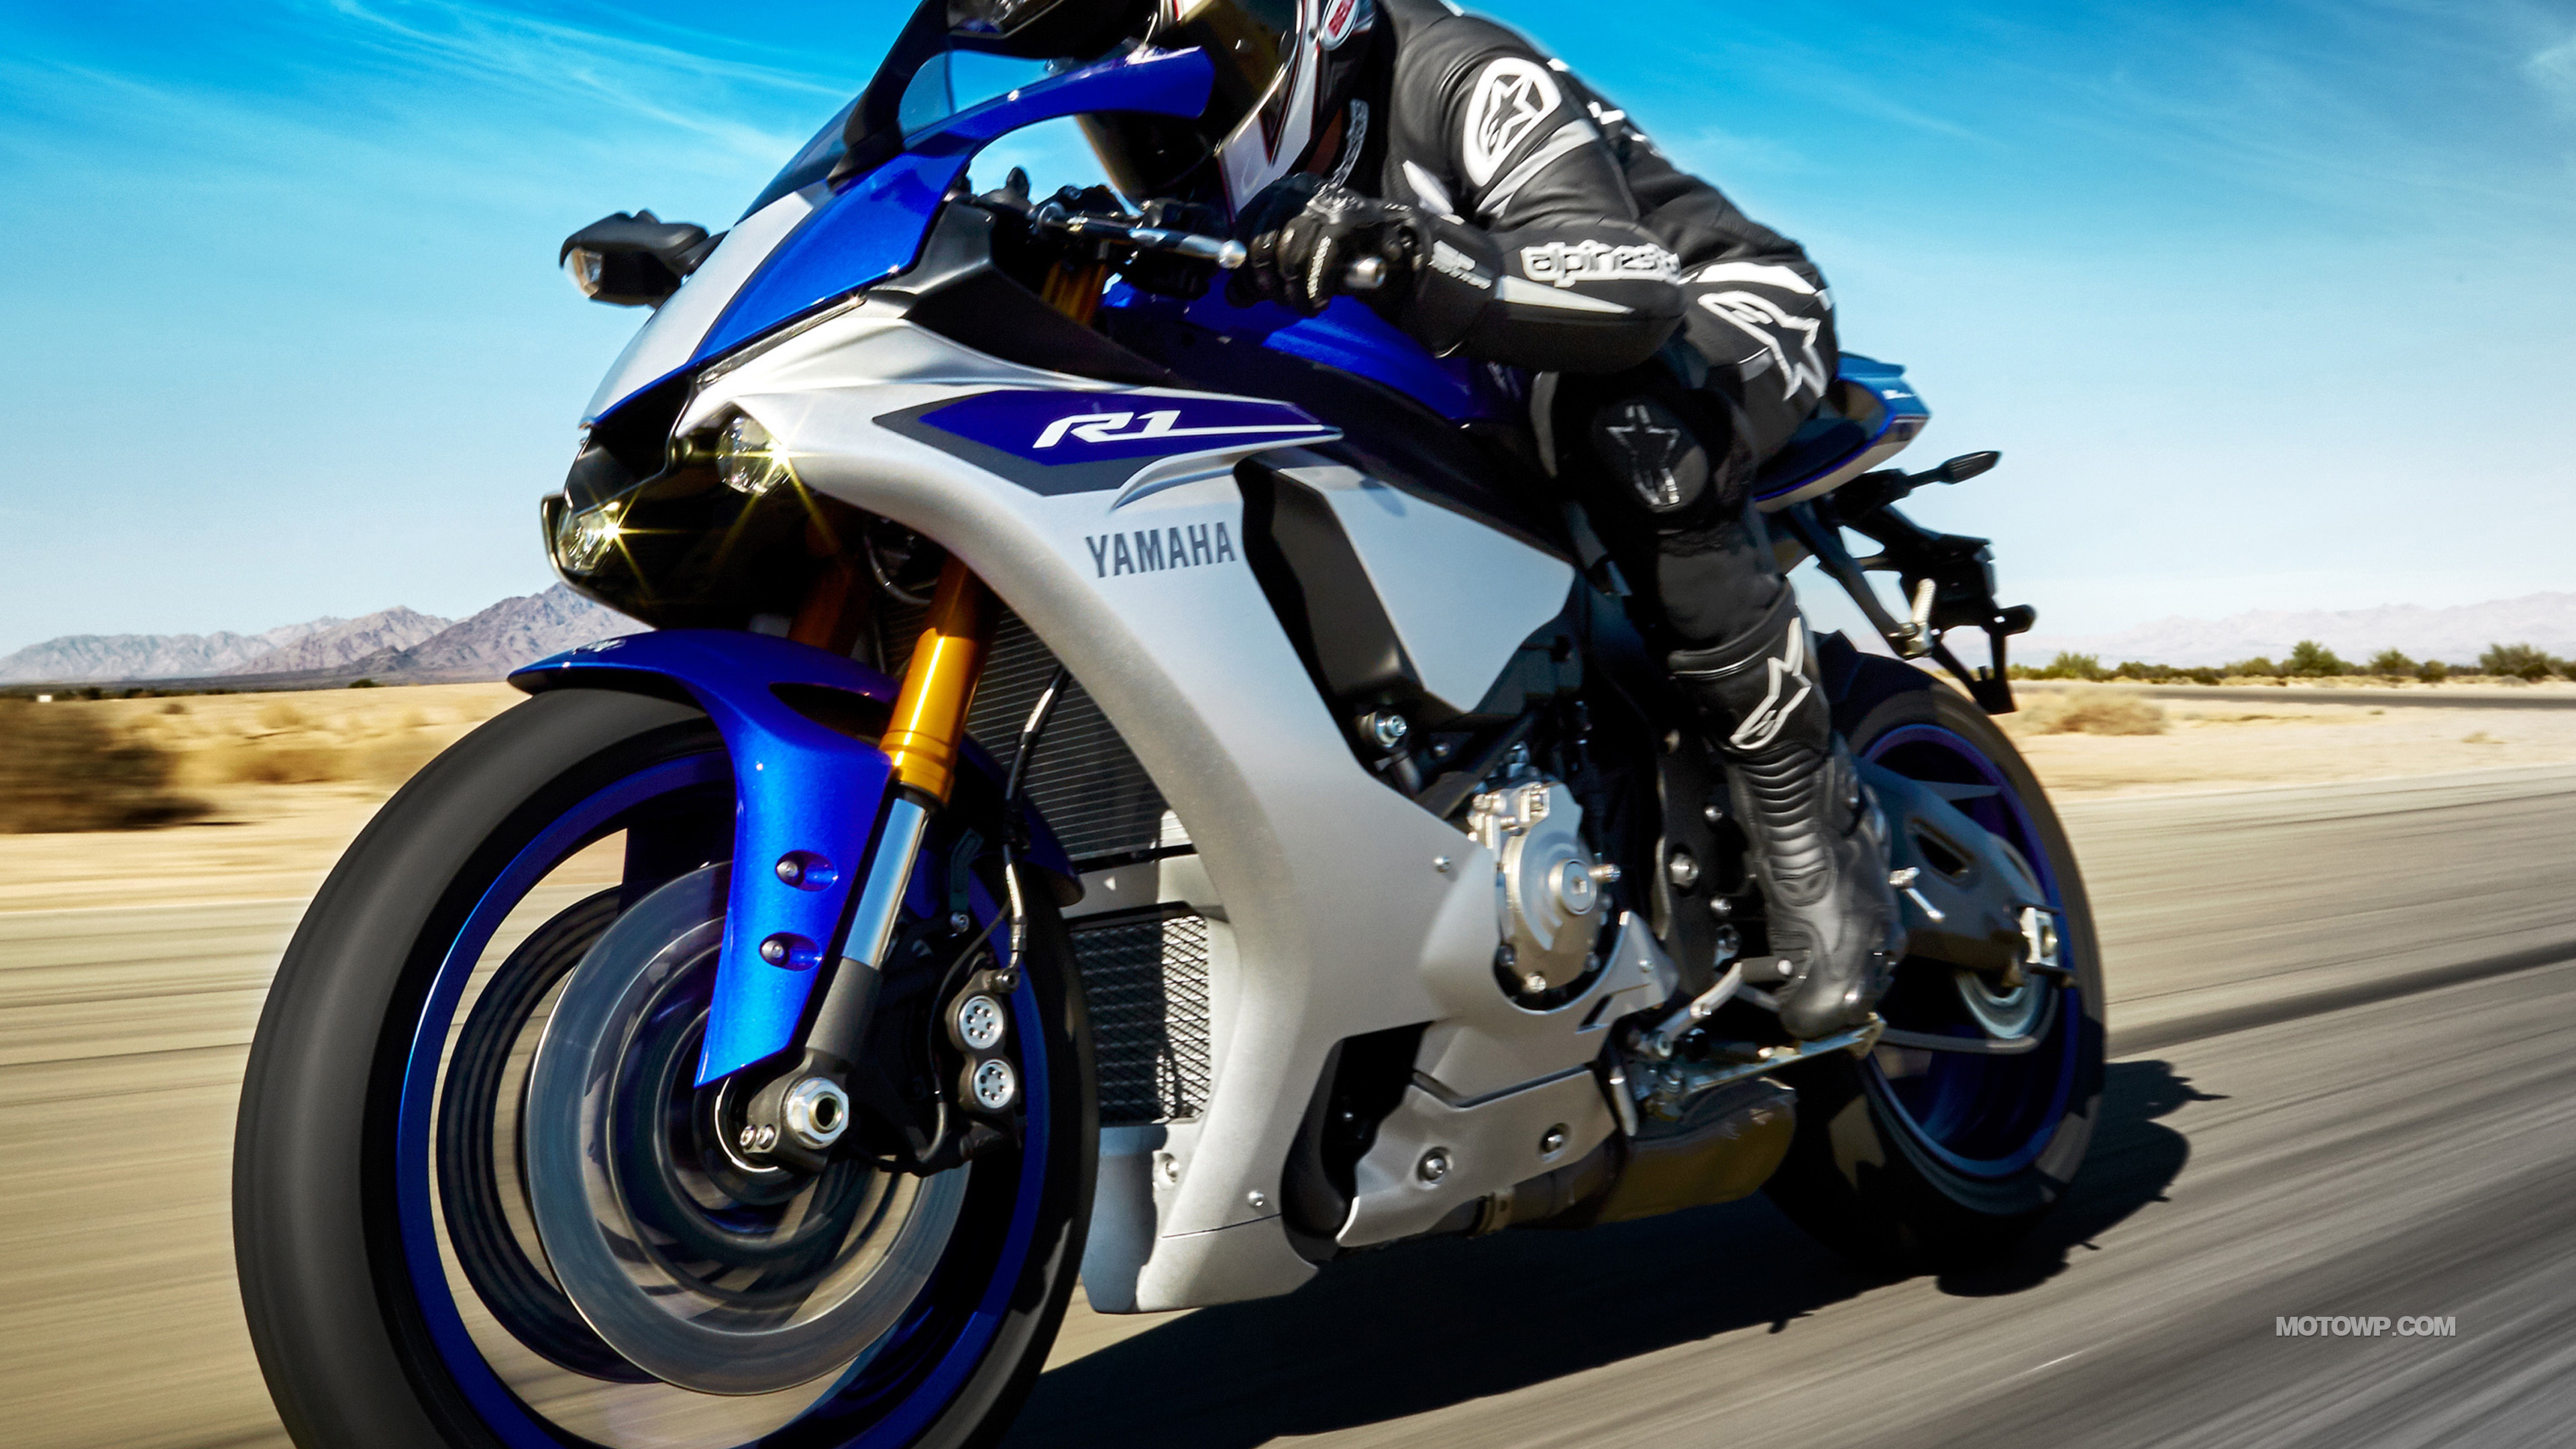 3840x2160 Motorcycle wallpapers Yamaha YZF-R1 ...